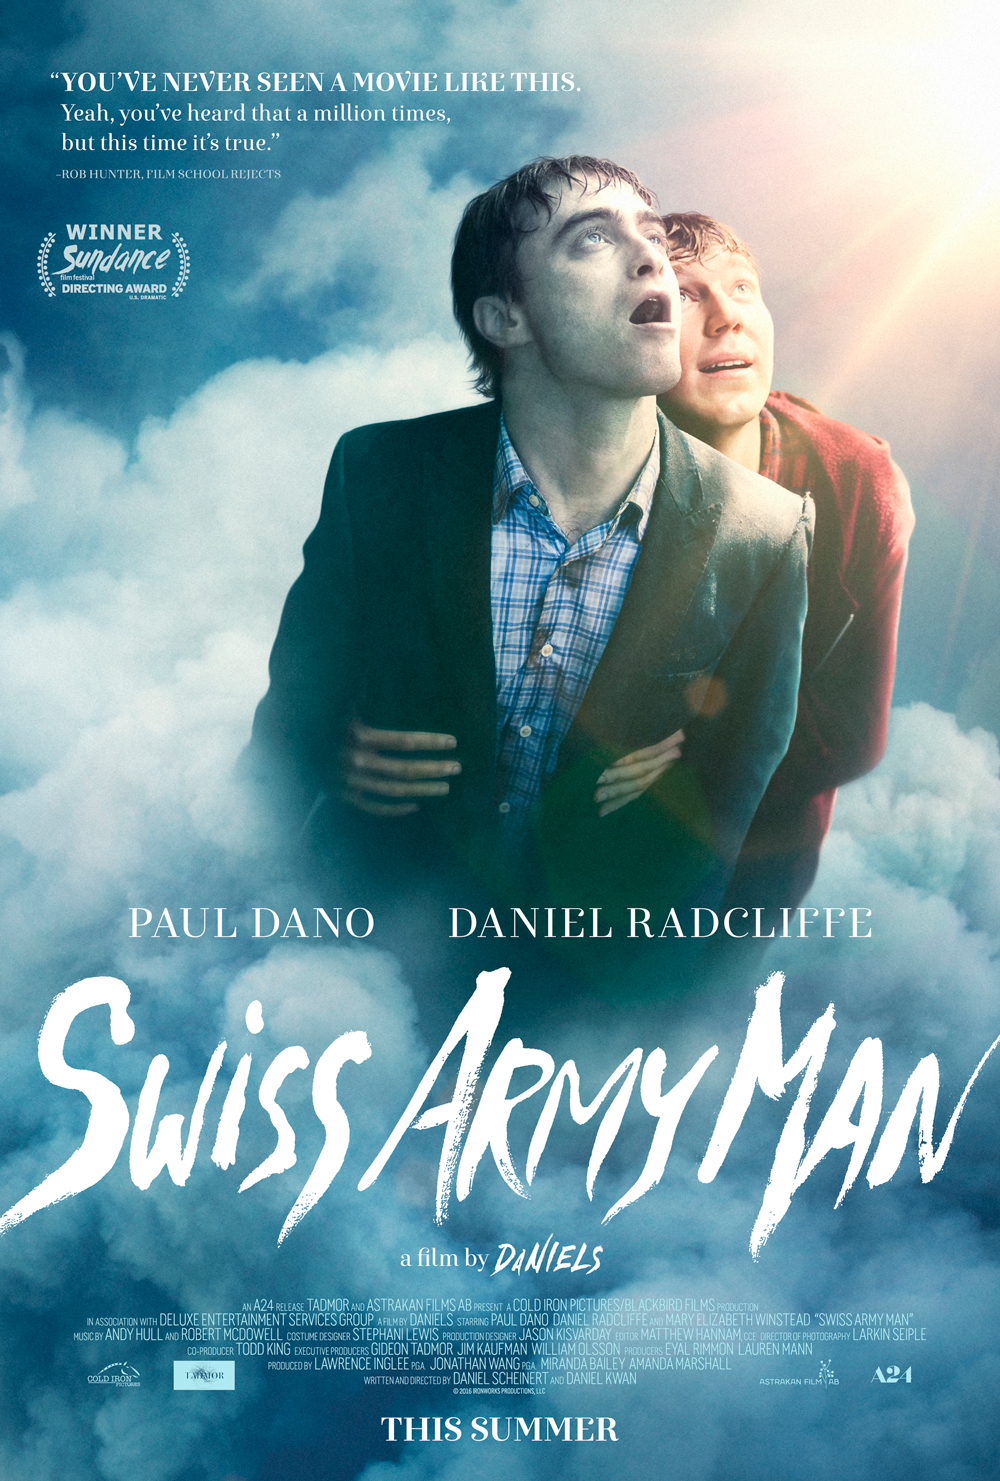 An image about Swiss Army Man